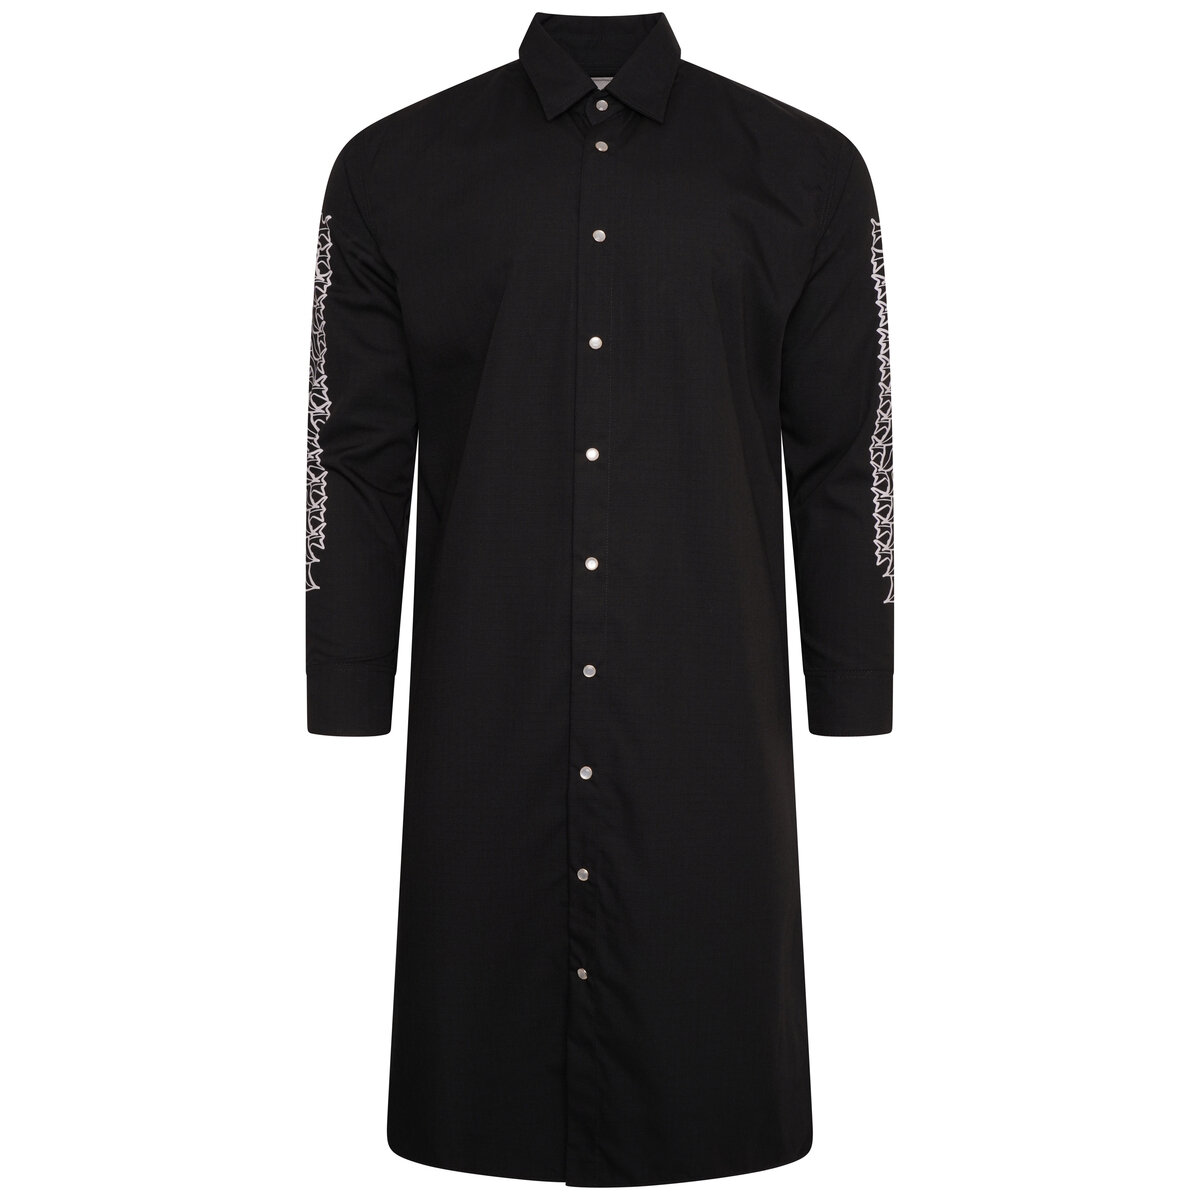 Black Woven Shirt With Flower Detailing S Black